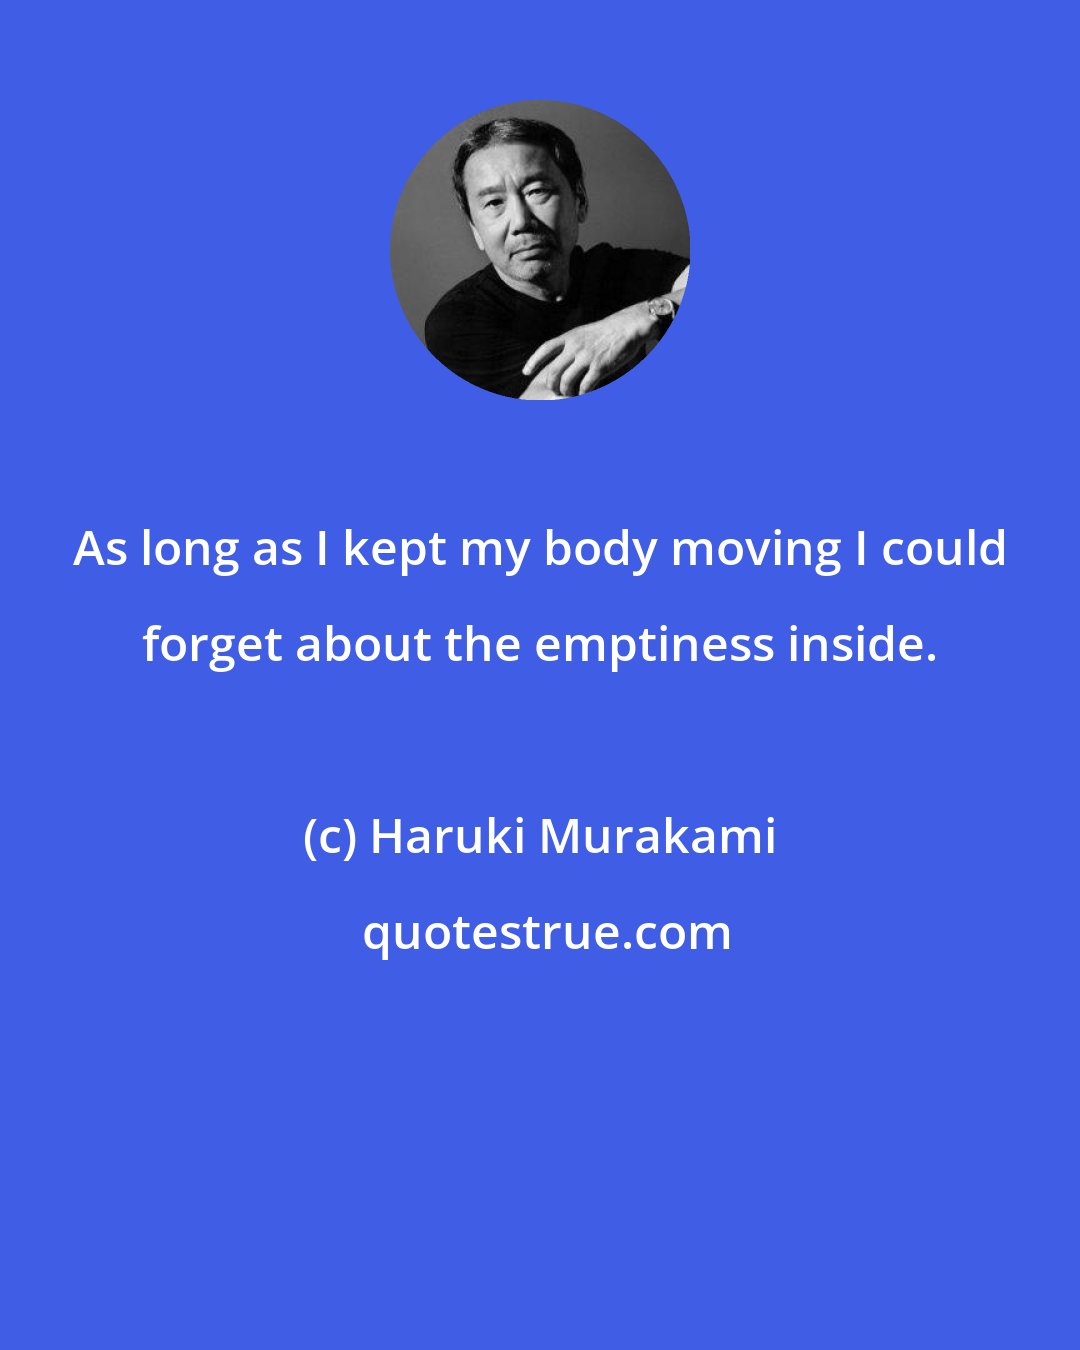 Haruki Murakami: As long as I kept my body moving I could forget about the emptiness inside.